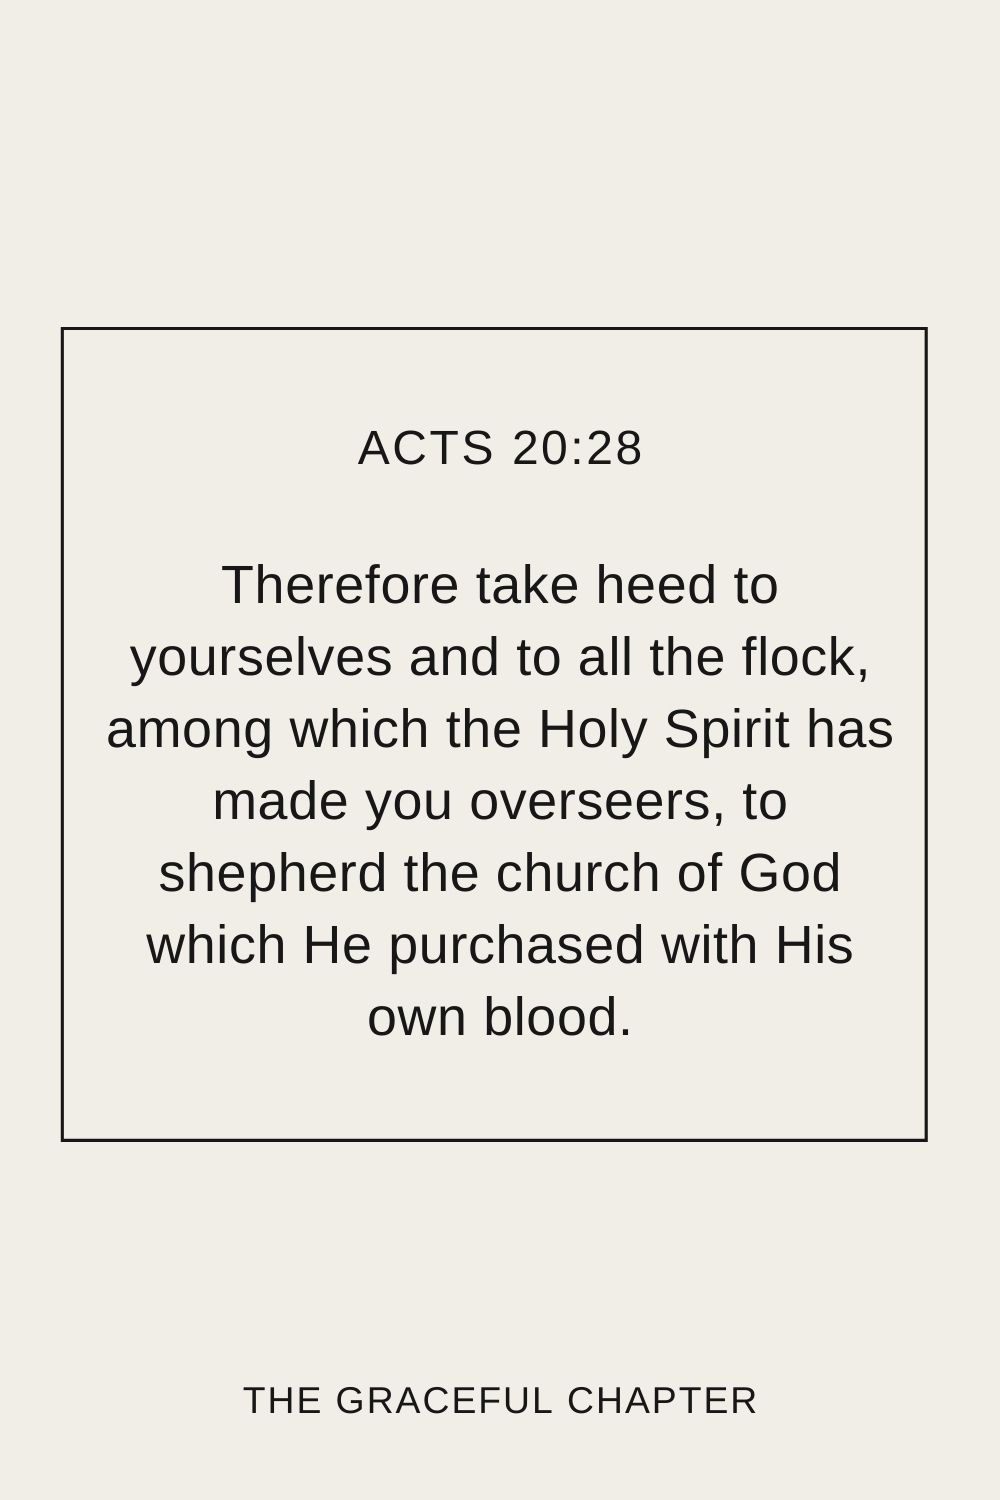 Therefore take heed to yourselves and to all the flock, among which the Holy Spirit has made you overseers, to shepherd the church of God which He purchased with His own blood. Acts 20:28